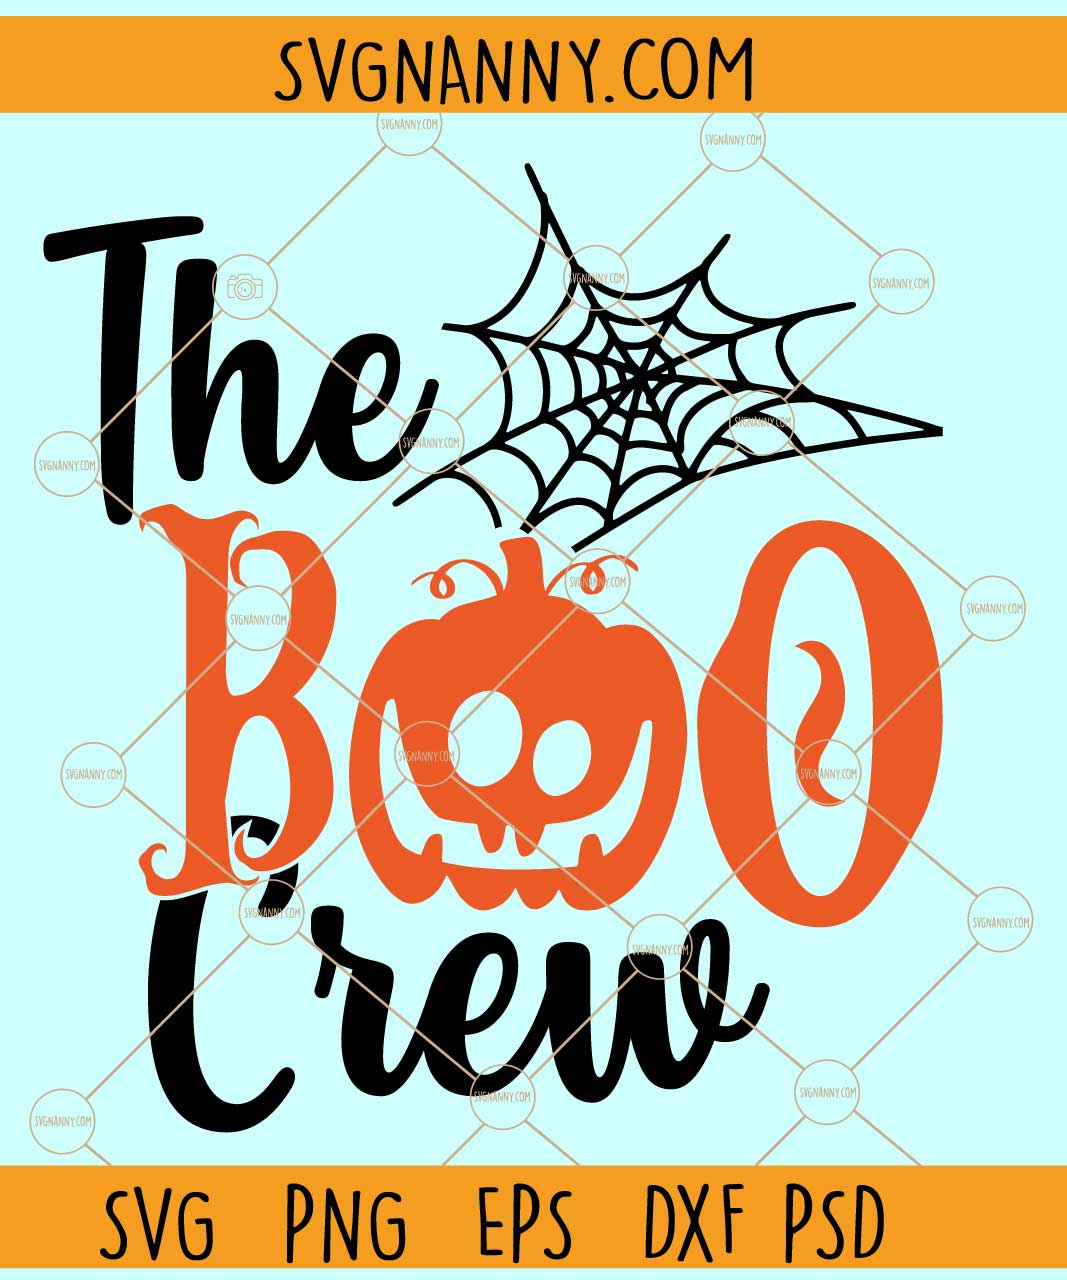 The Boo crew svg, Halloween boo crew svg, Ghost svg